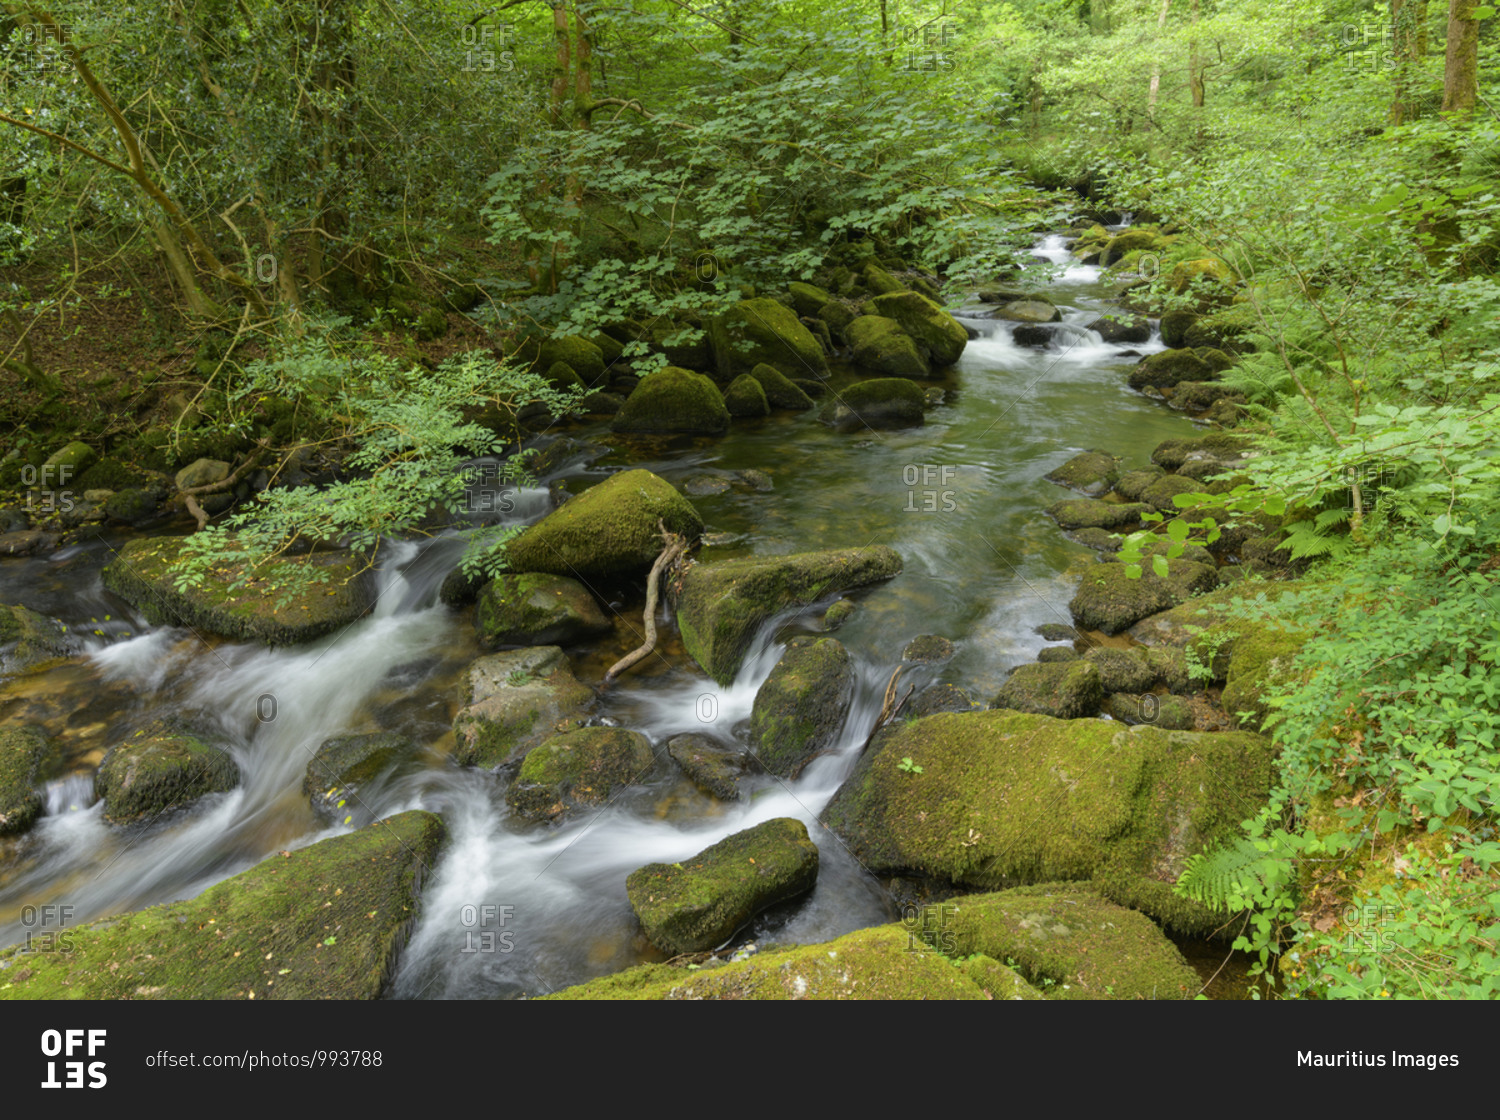 River in the forest, River meavy, Dewerstone wood, Plymouth, Devon, England, United Kingdom, Europe